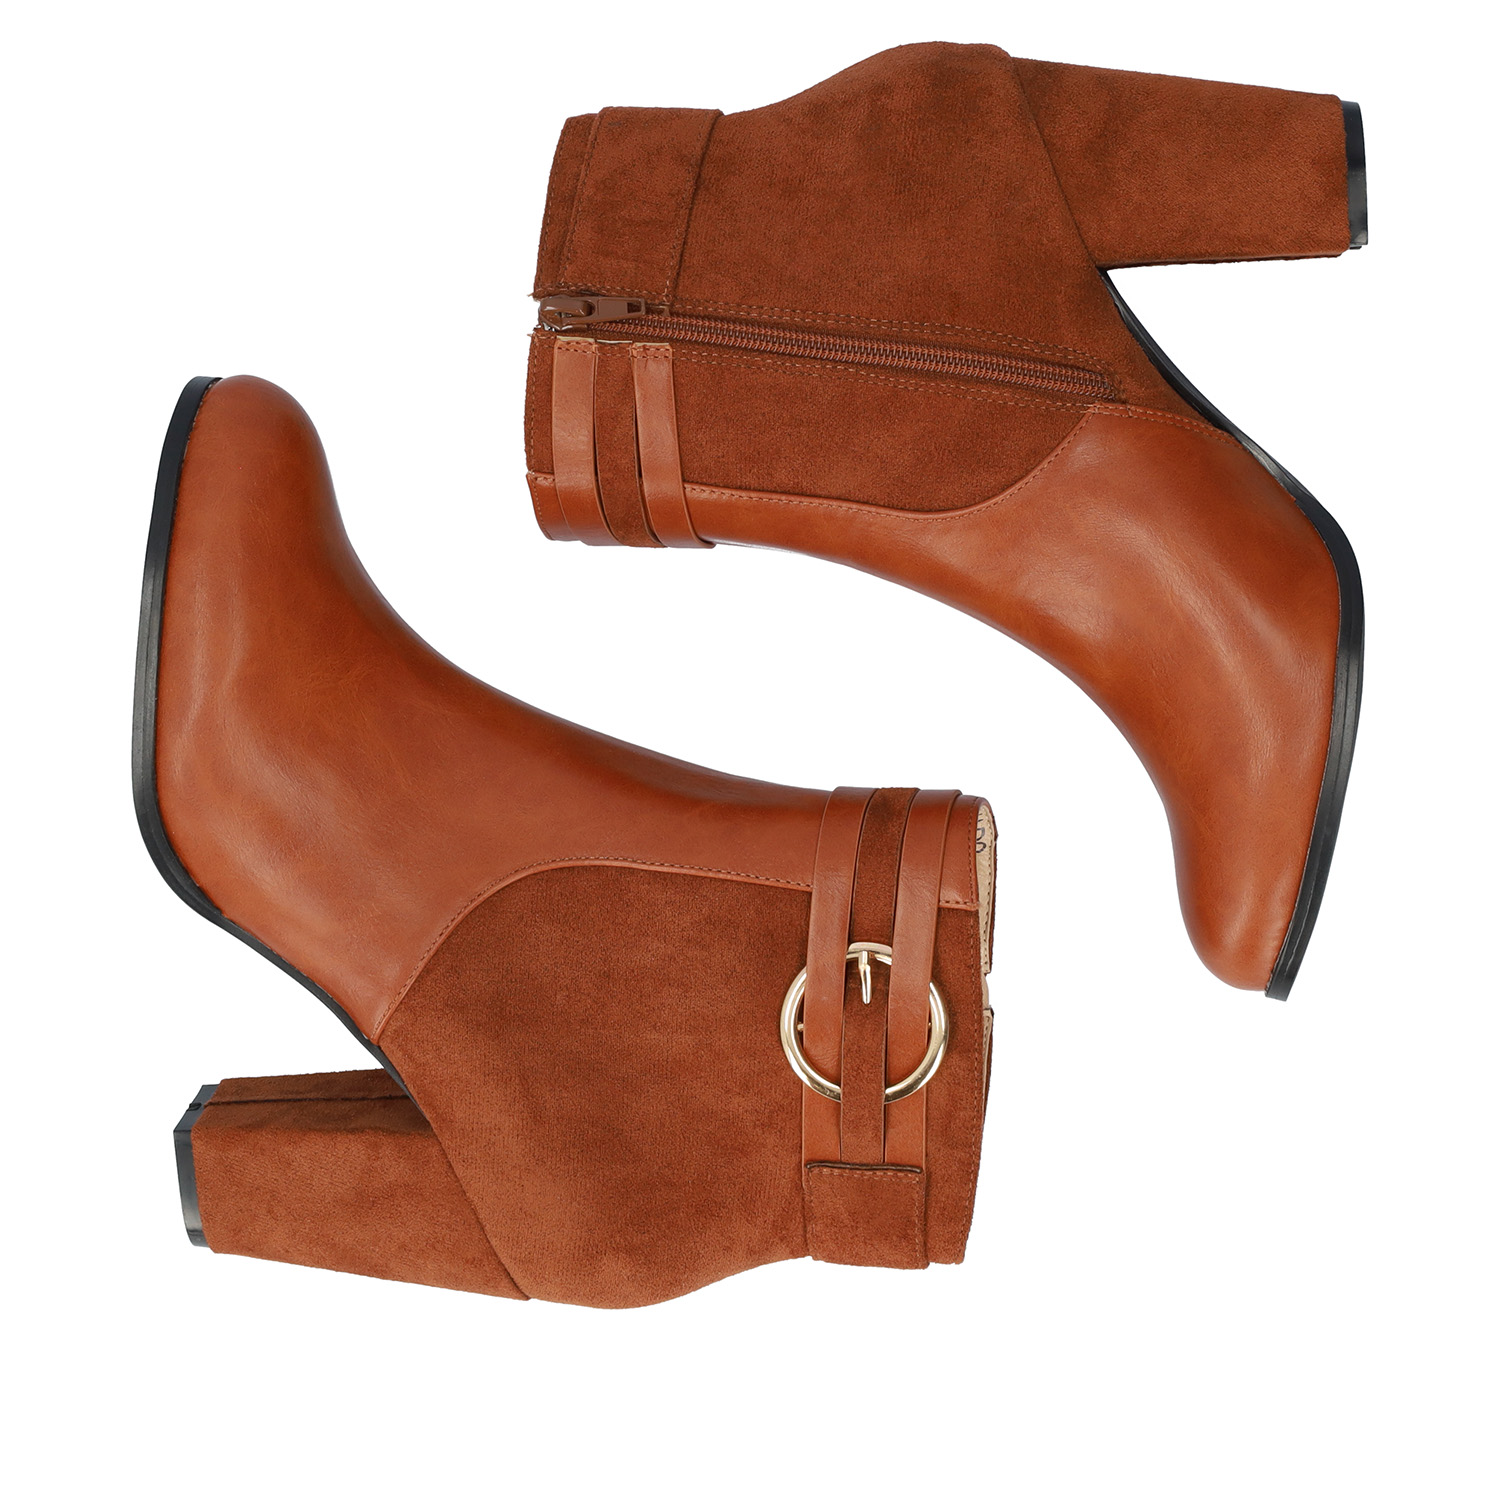 High heeled combined brown colour bootie. 